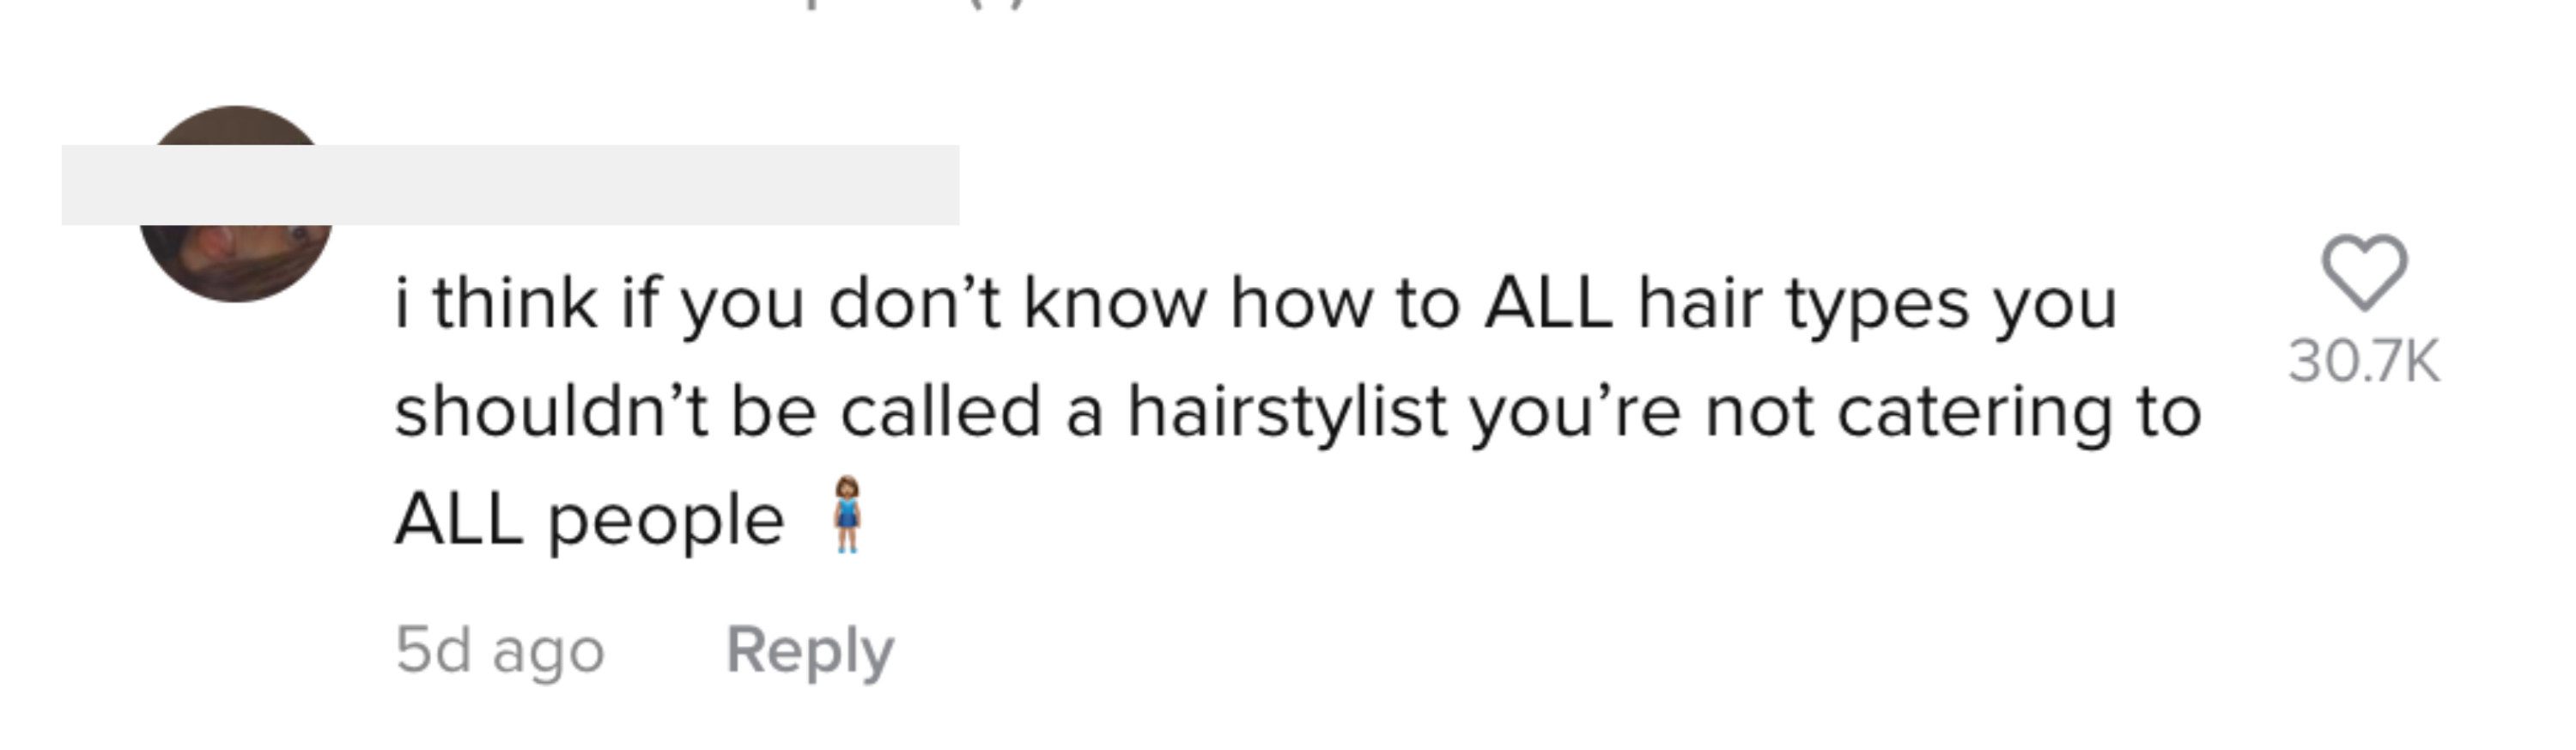 One person commented, &quot;I think you don&#x27;t know hot to [do] ALL hair types you shouldn&#x27;t be called a hairstylist you&#x27;re not catering to ALL people&quot;